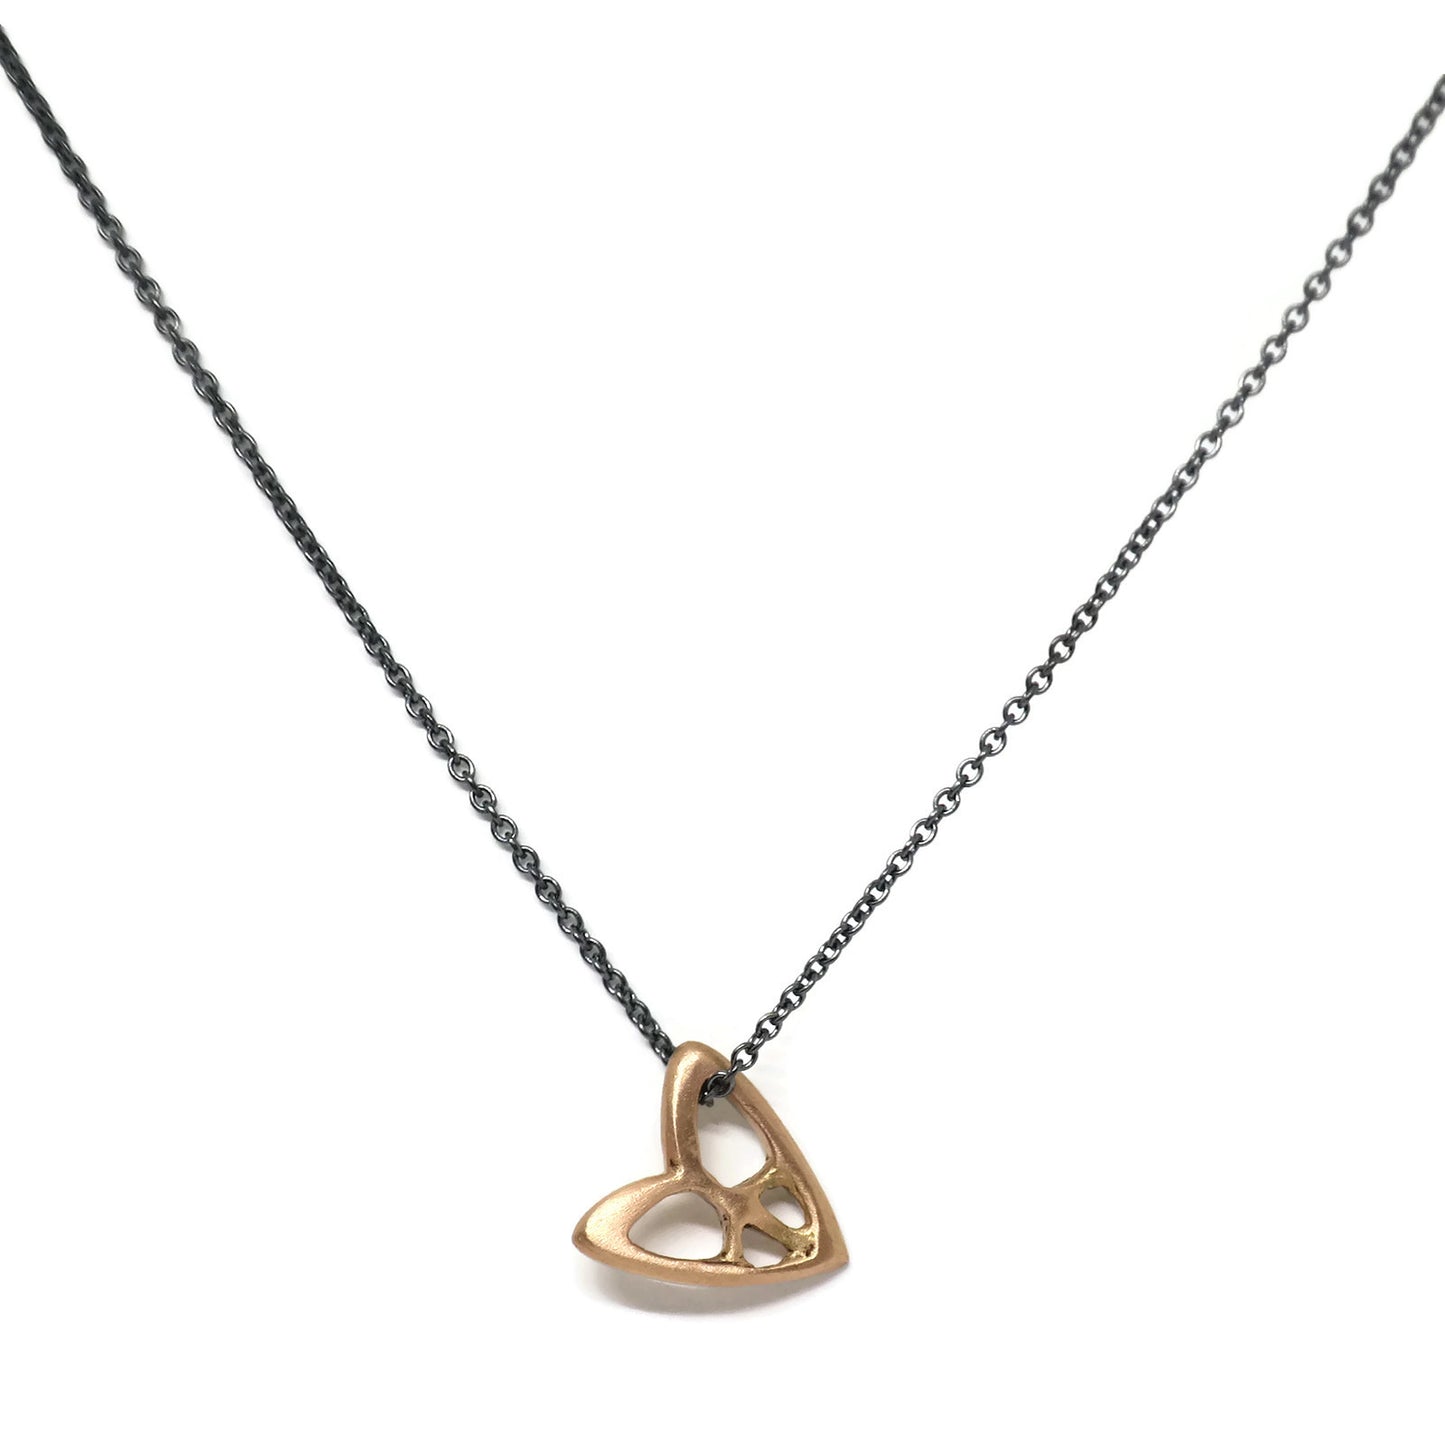 Peace & Love Necklace- 10% of sales go to charity